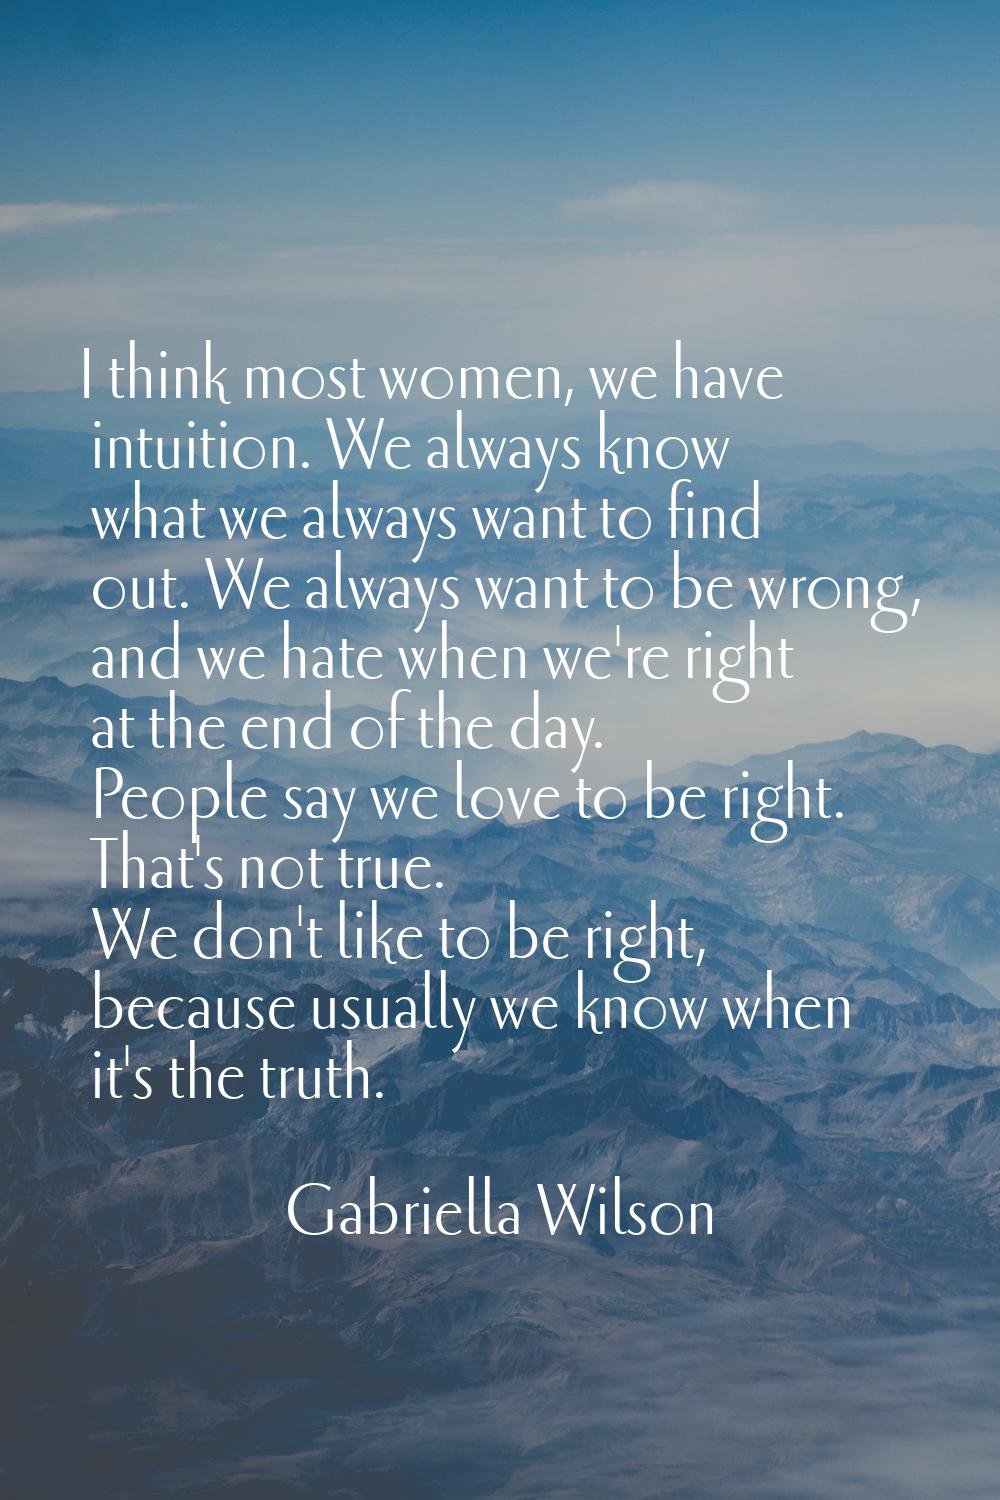 I think most women, we have intuition. We always know what we always want to find out. We always wa